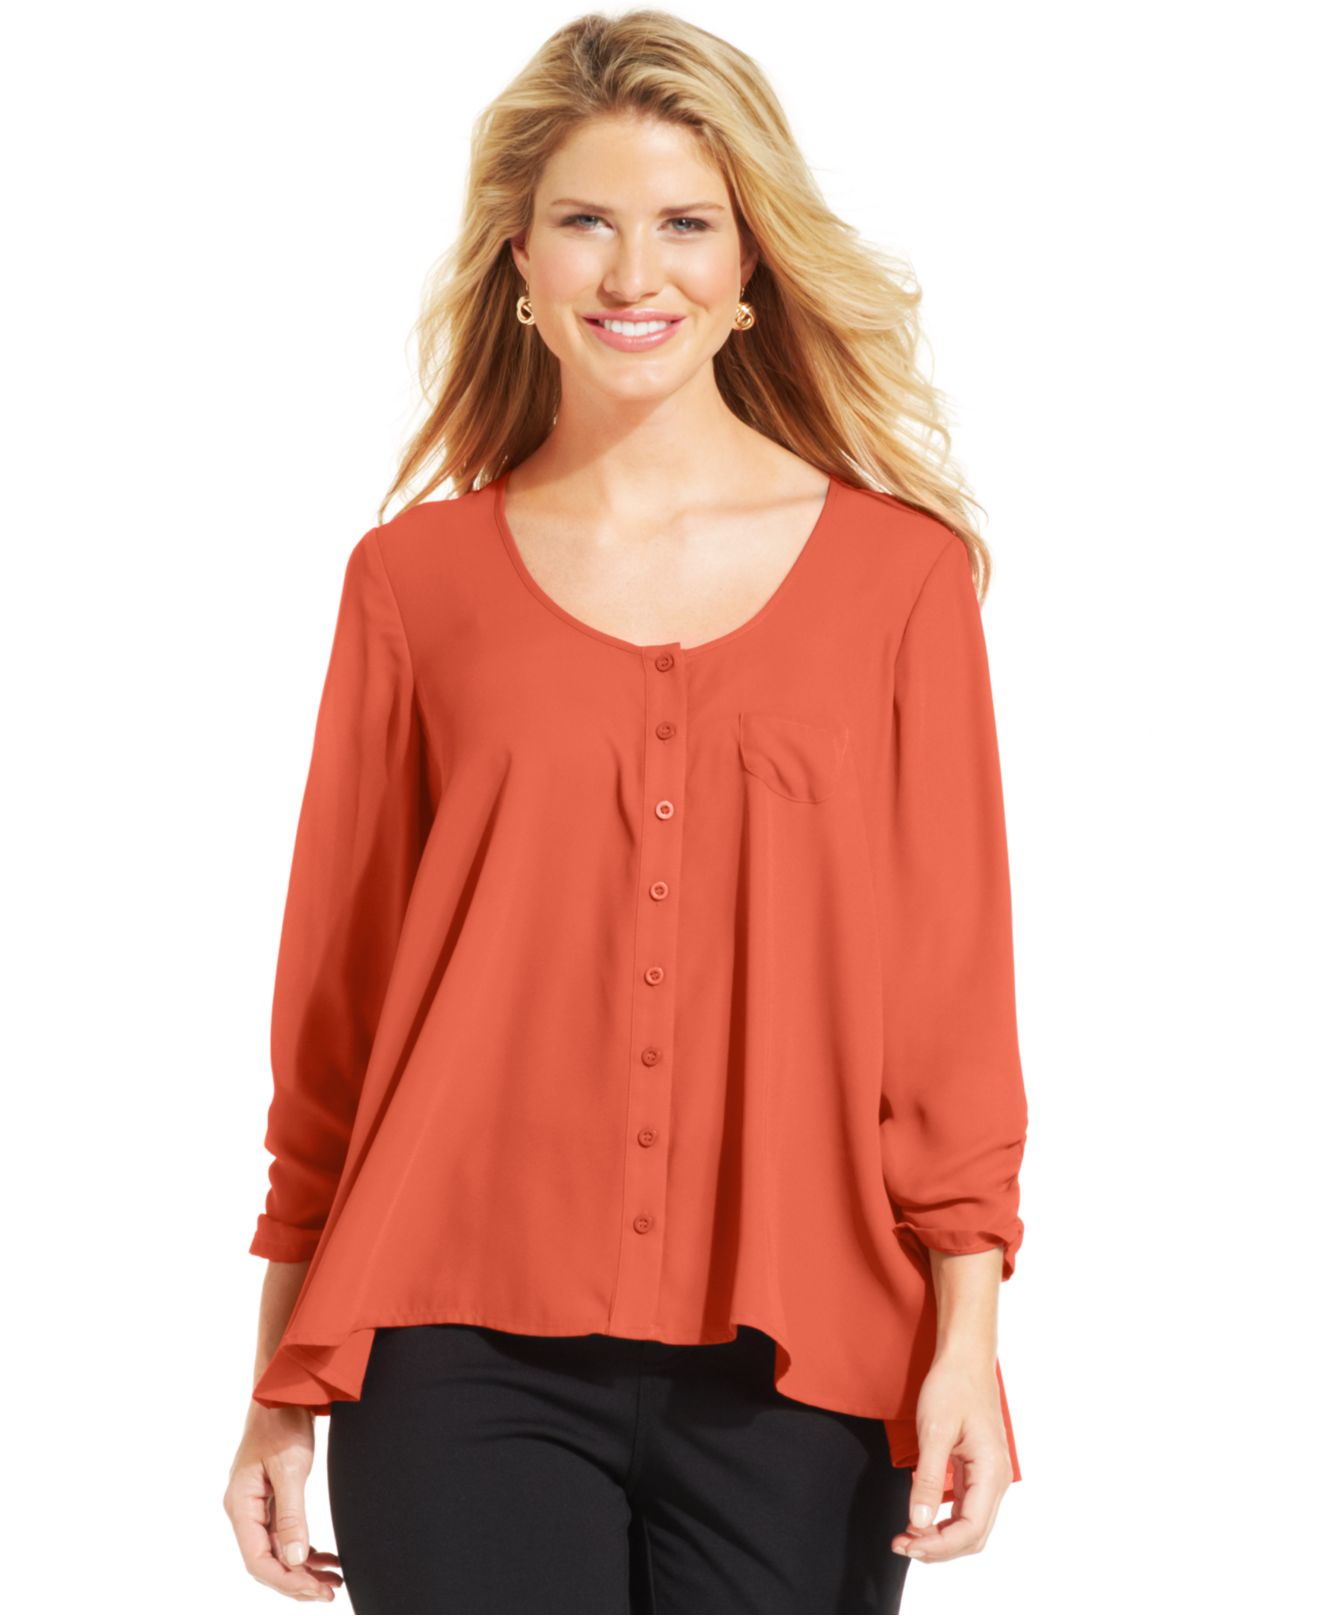 Lyst - Style & Co. Button-front Peasant Blouse in Orange